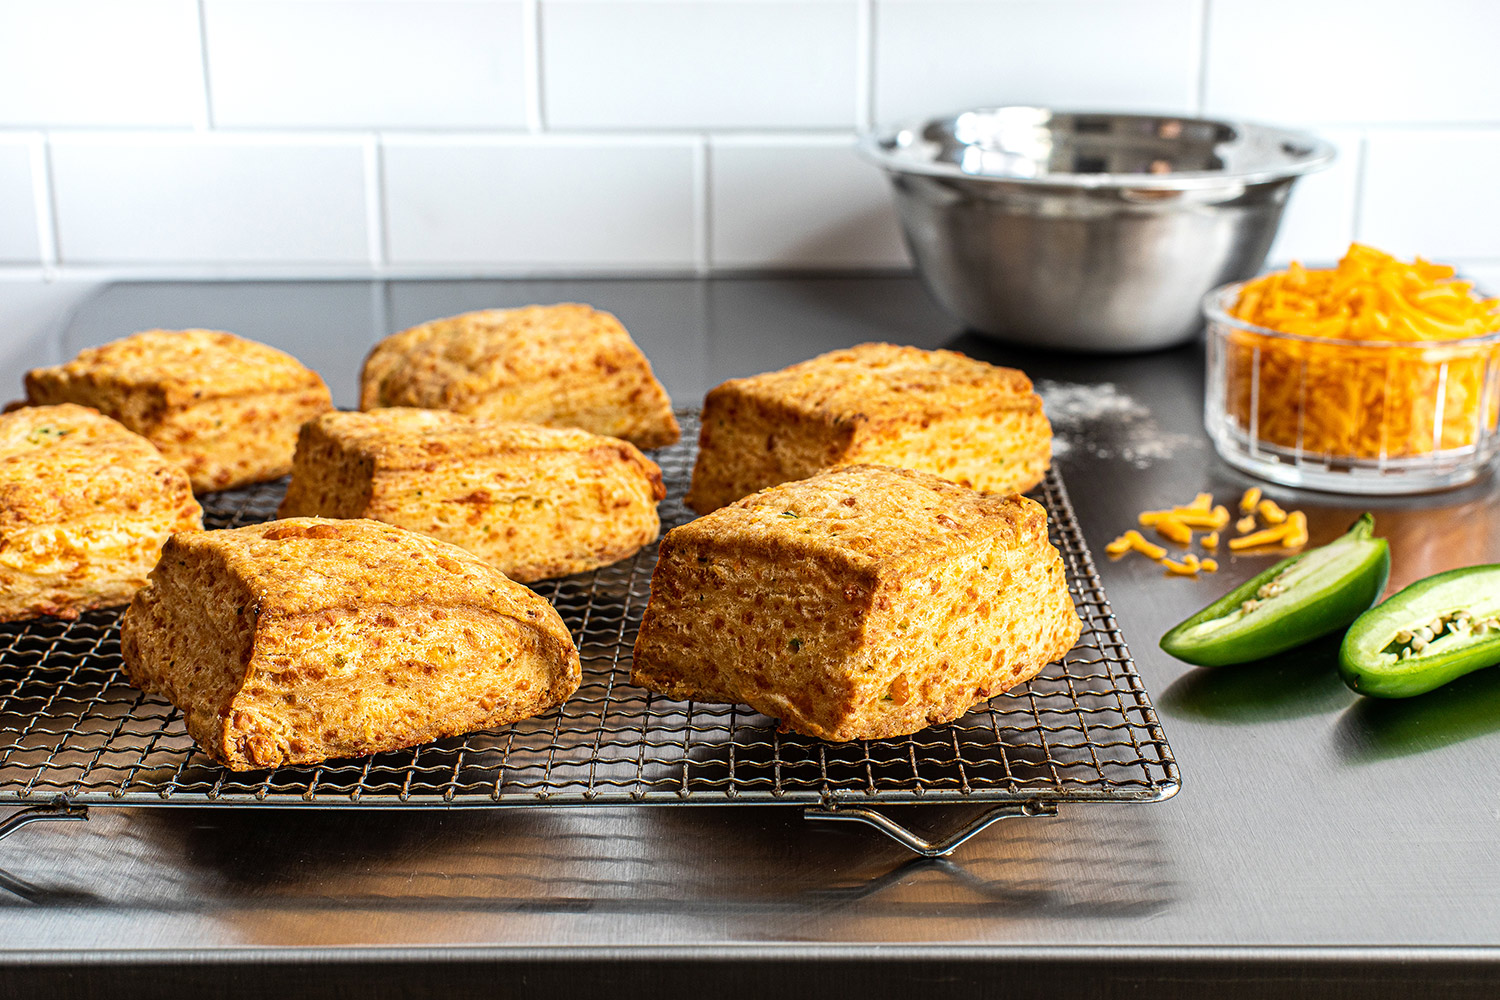 Cheddar and jalapeno scones